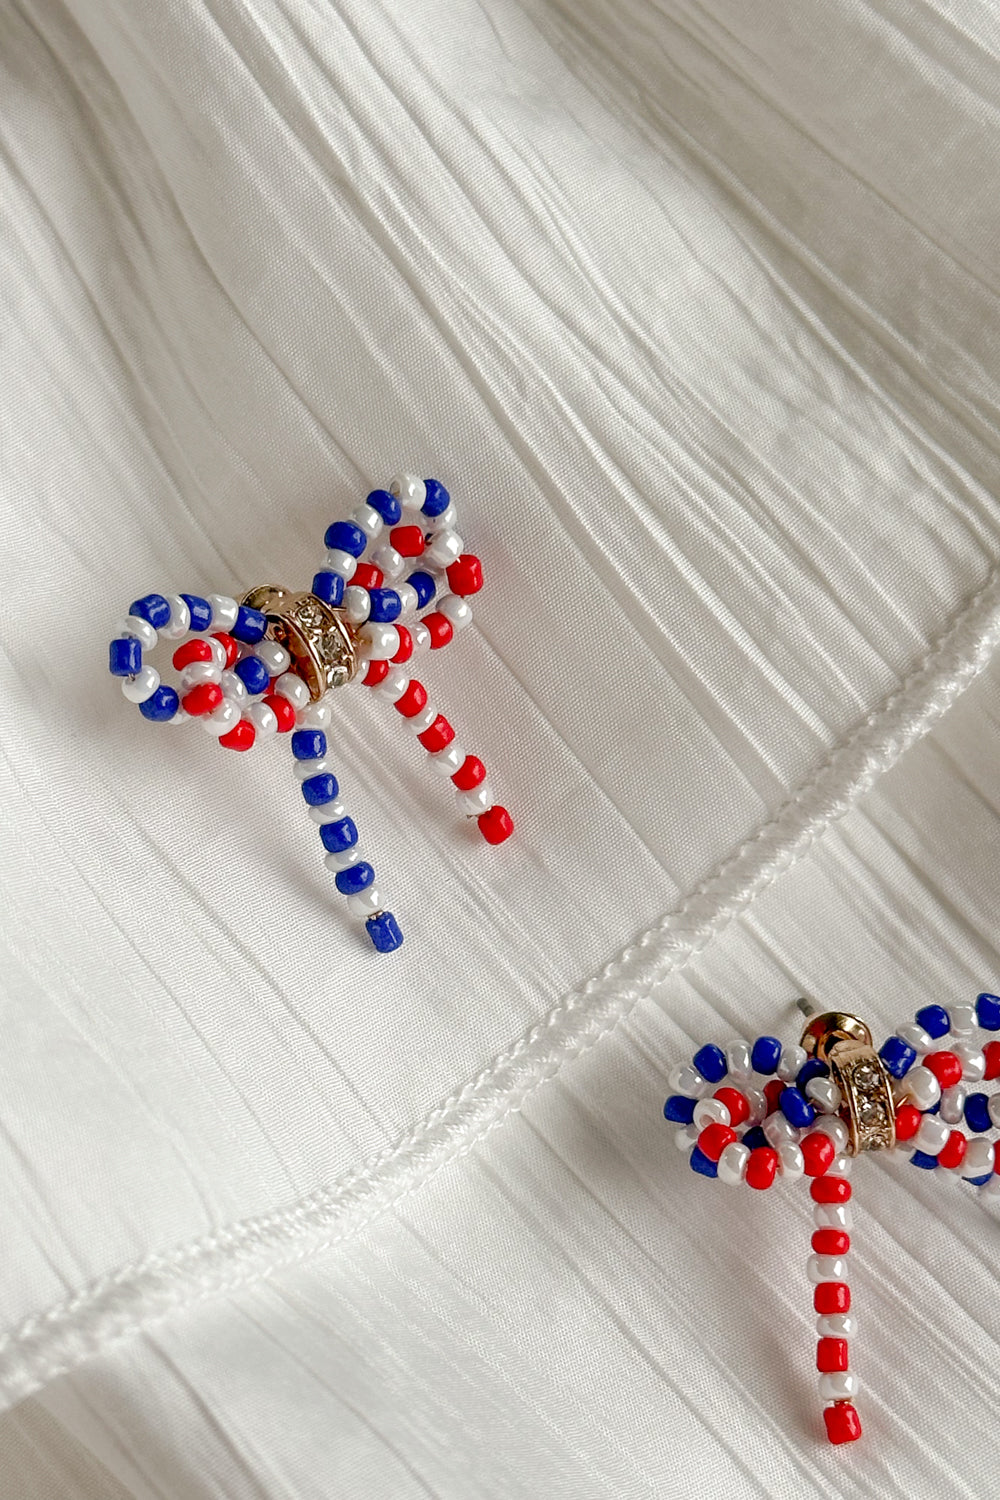 Image shows close-up of Quinn Red, White, & Blue Bow Earrings against a white background. Earrings have red white and blue beads in the shape of a bow, and the center is gold with rhinestones.